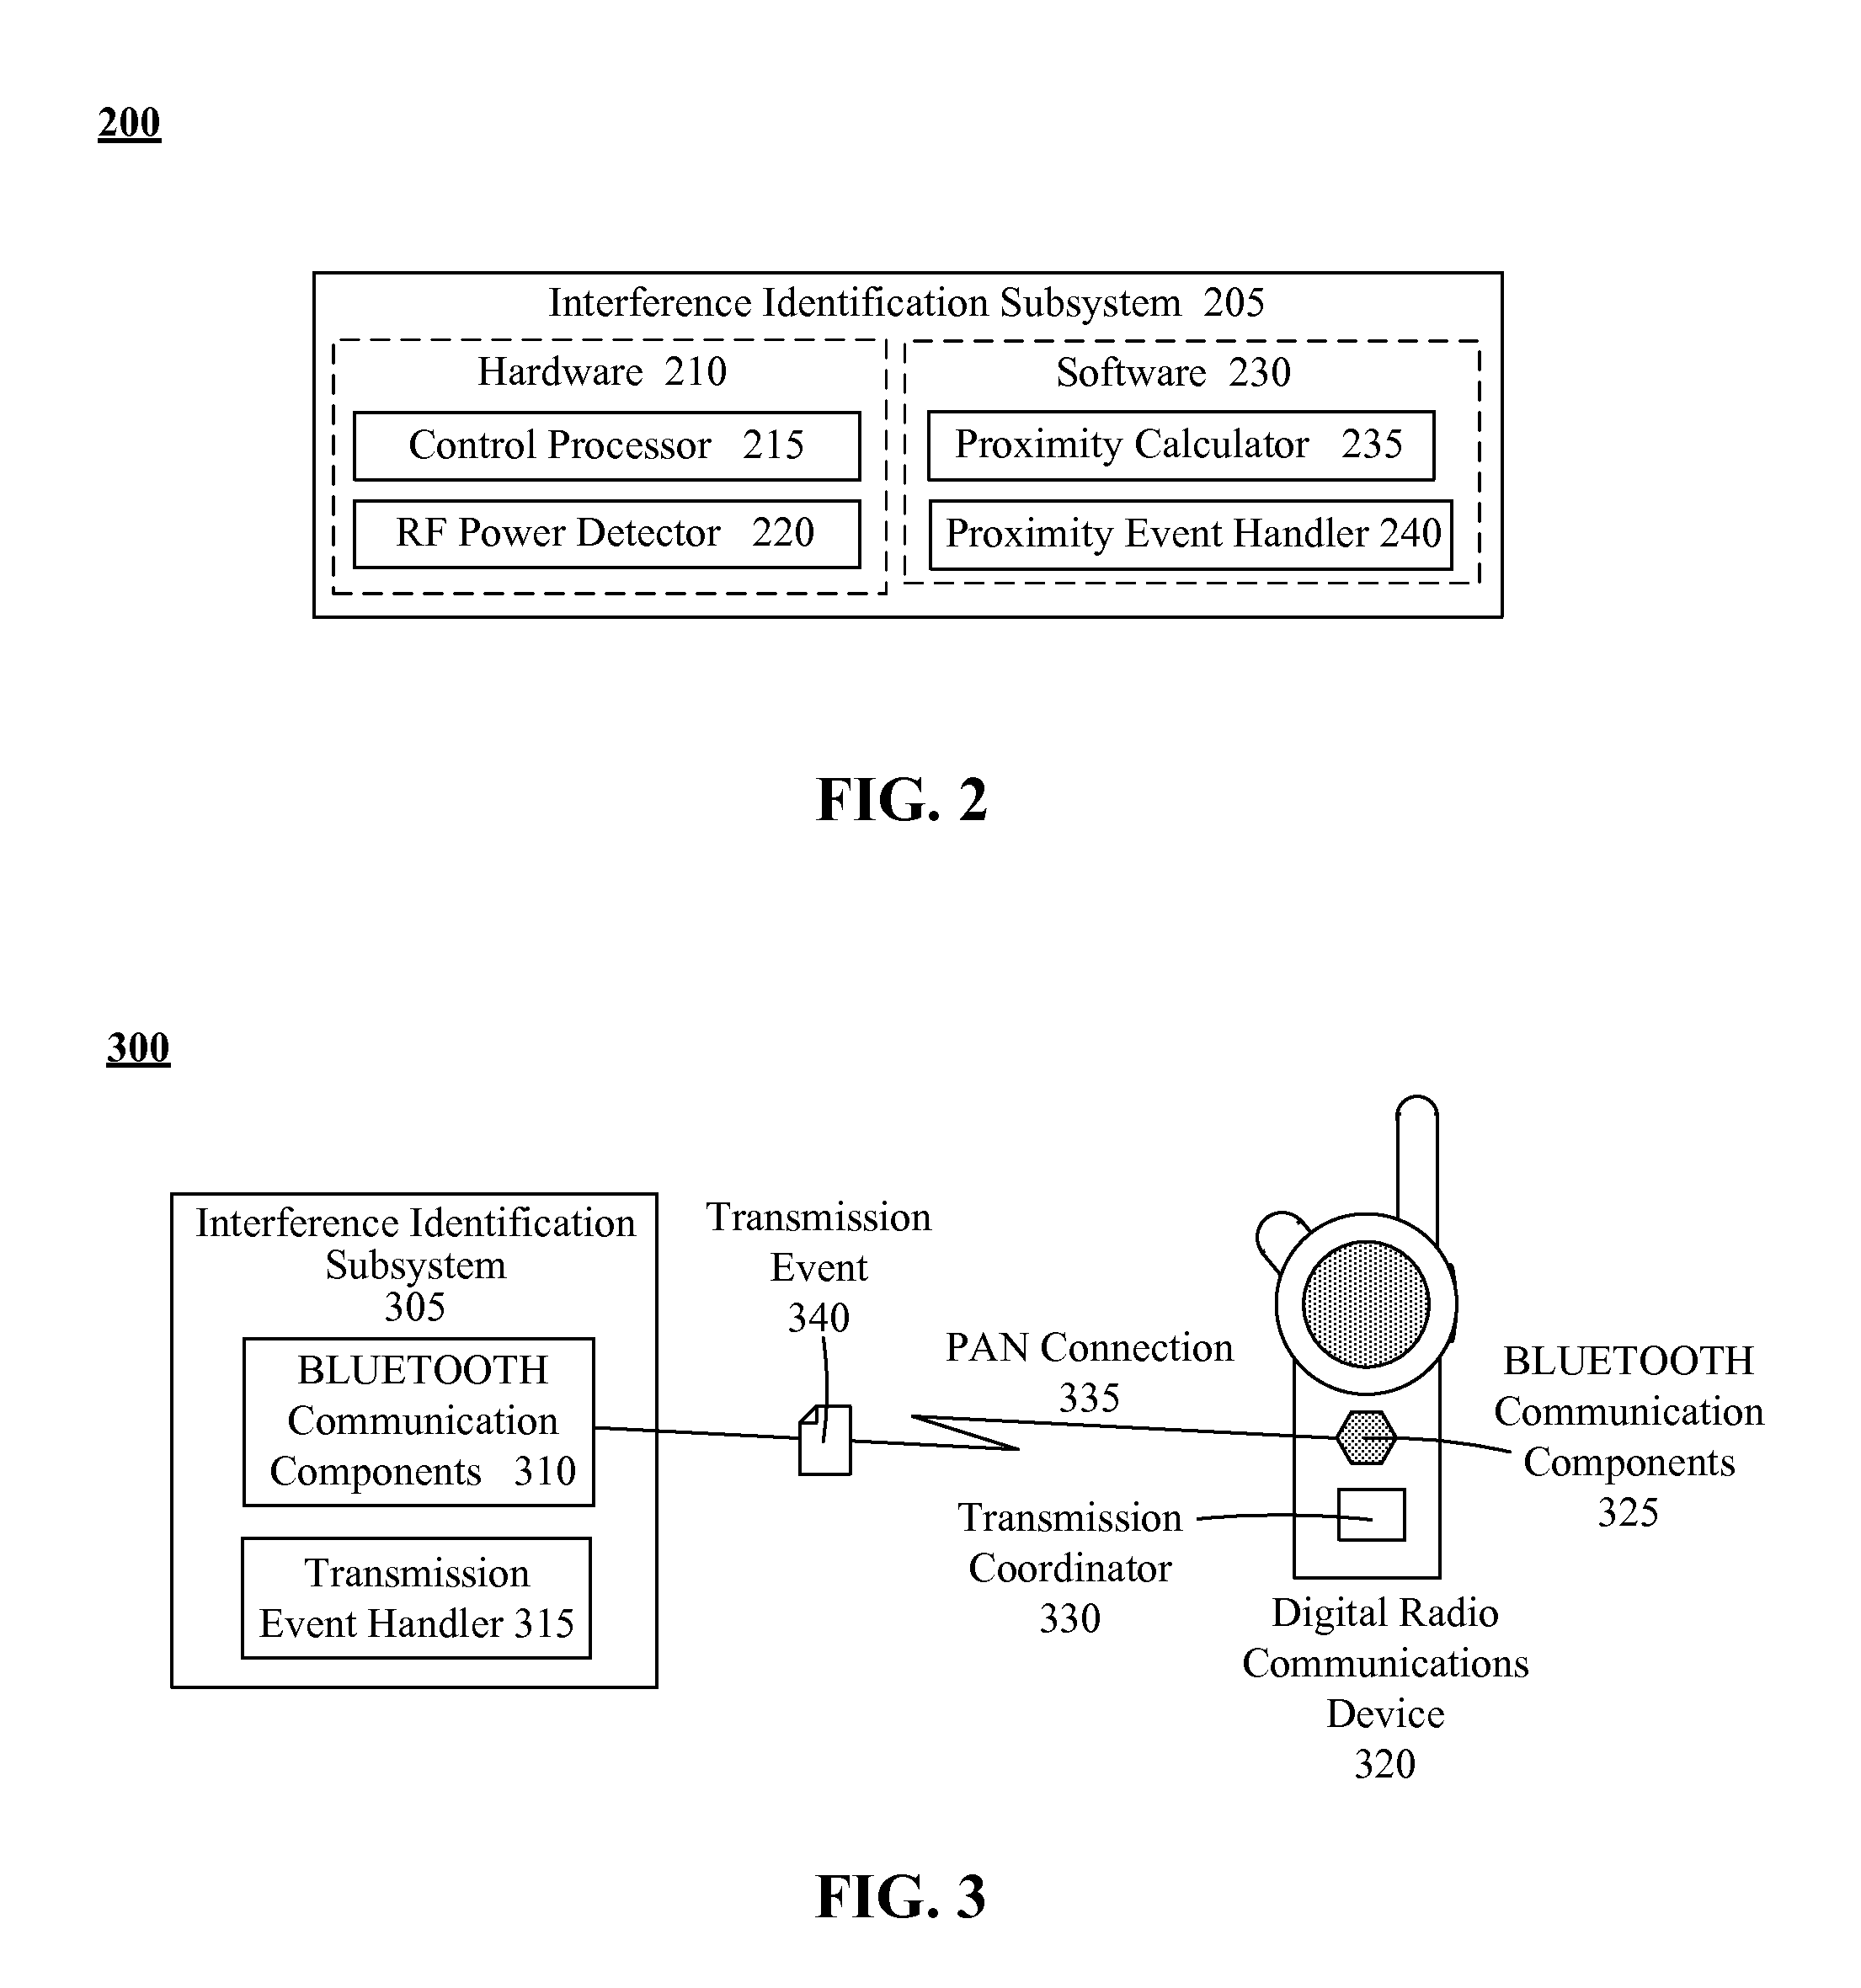 Mitigating transmission interference between digital radio and broadband communication devices